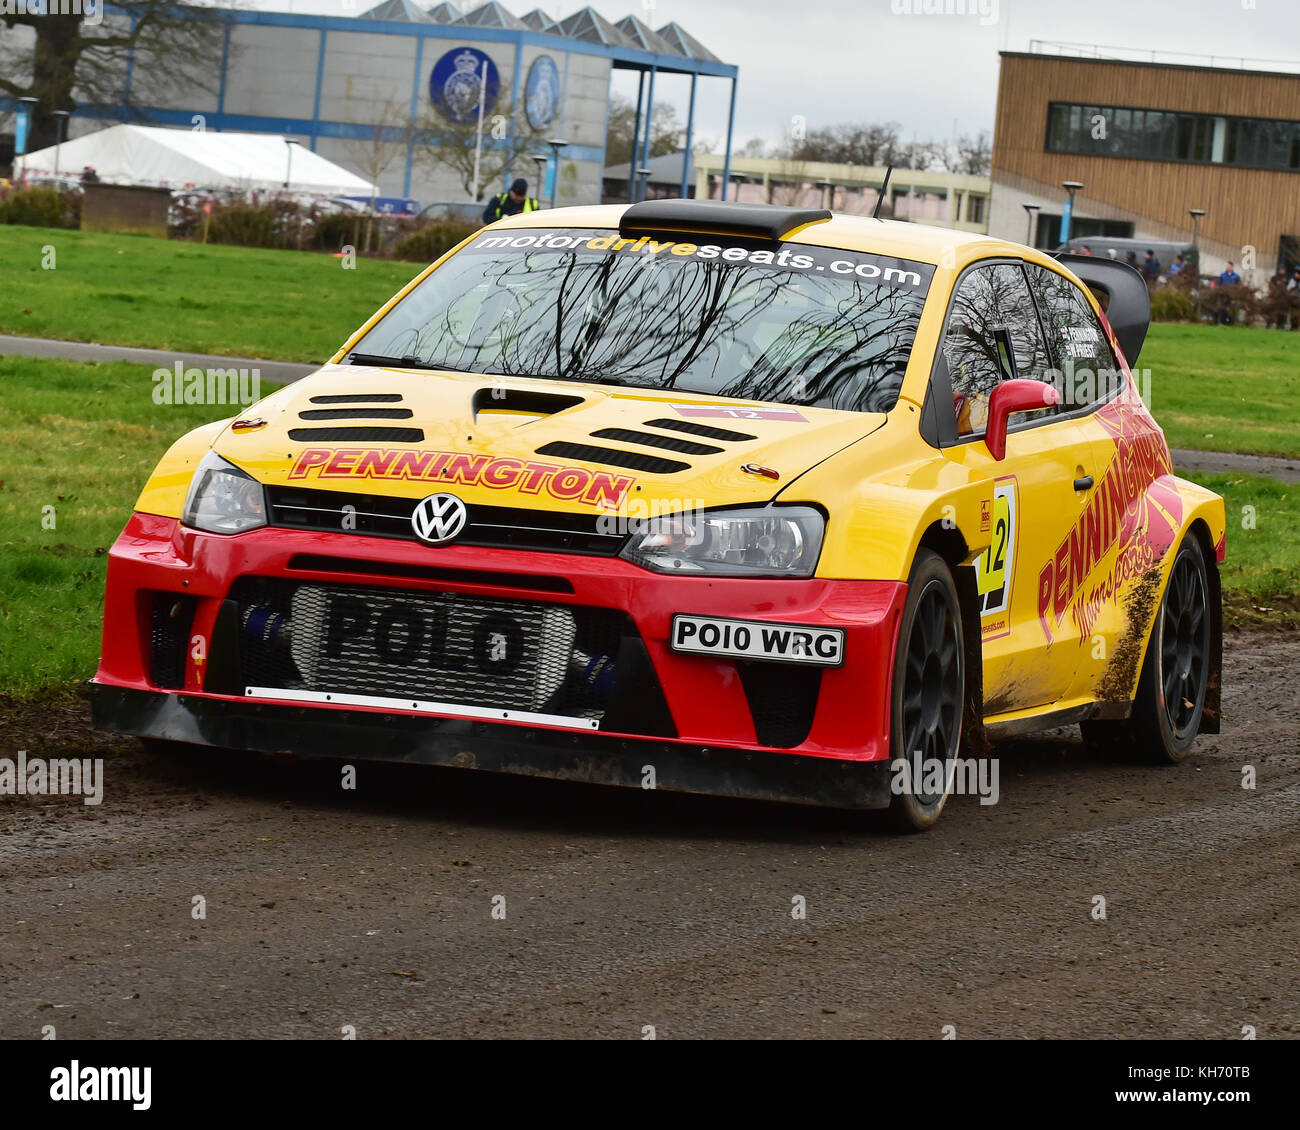 Polo wrc hi-res stock photography and images - Alamy